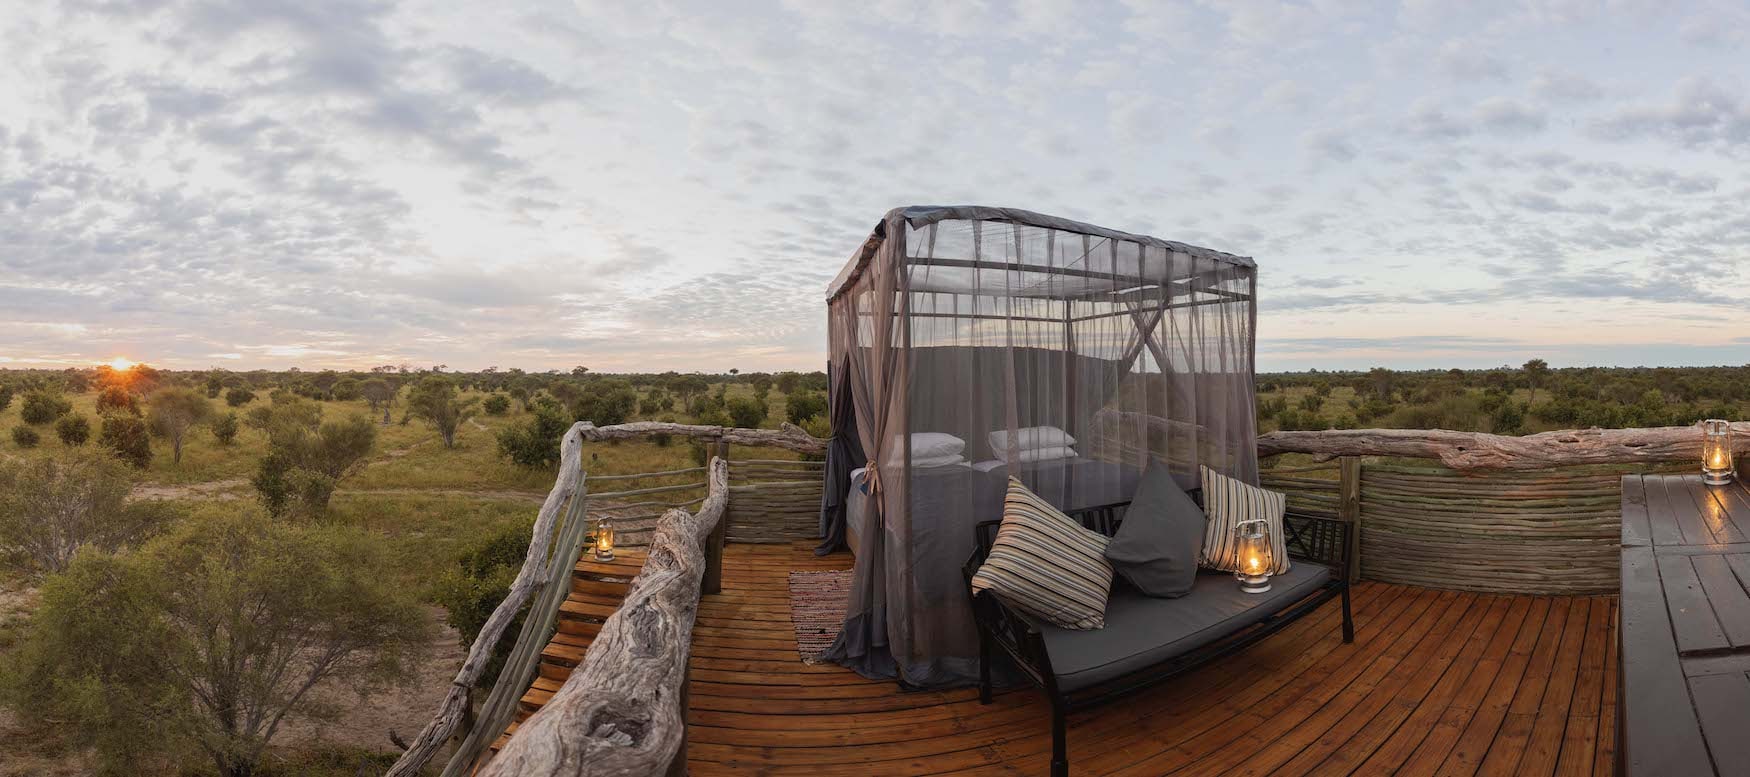 Skybeds in Safari Lodges in Afrika von Natural Selection